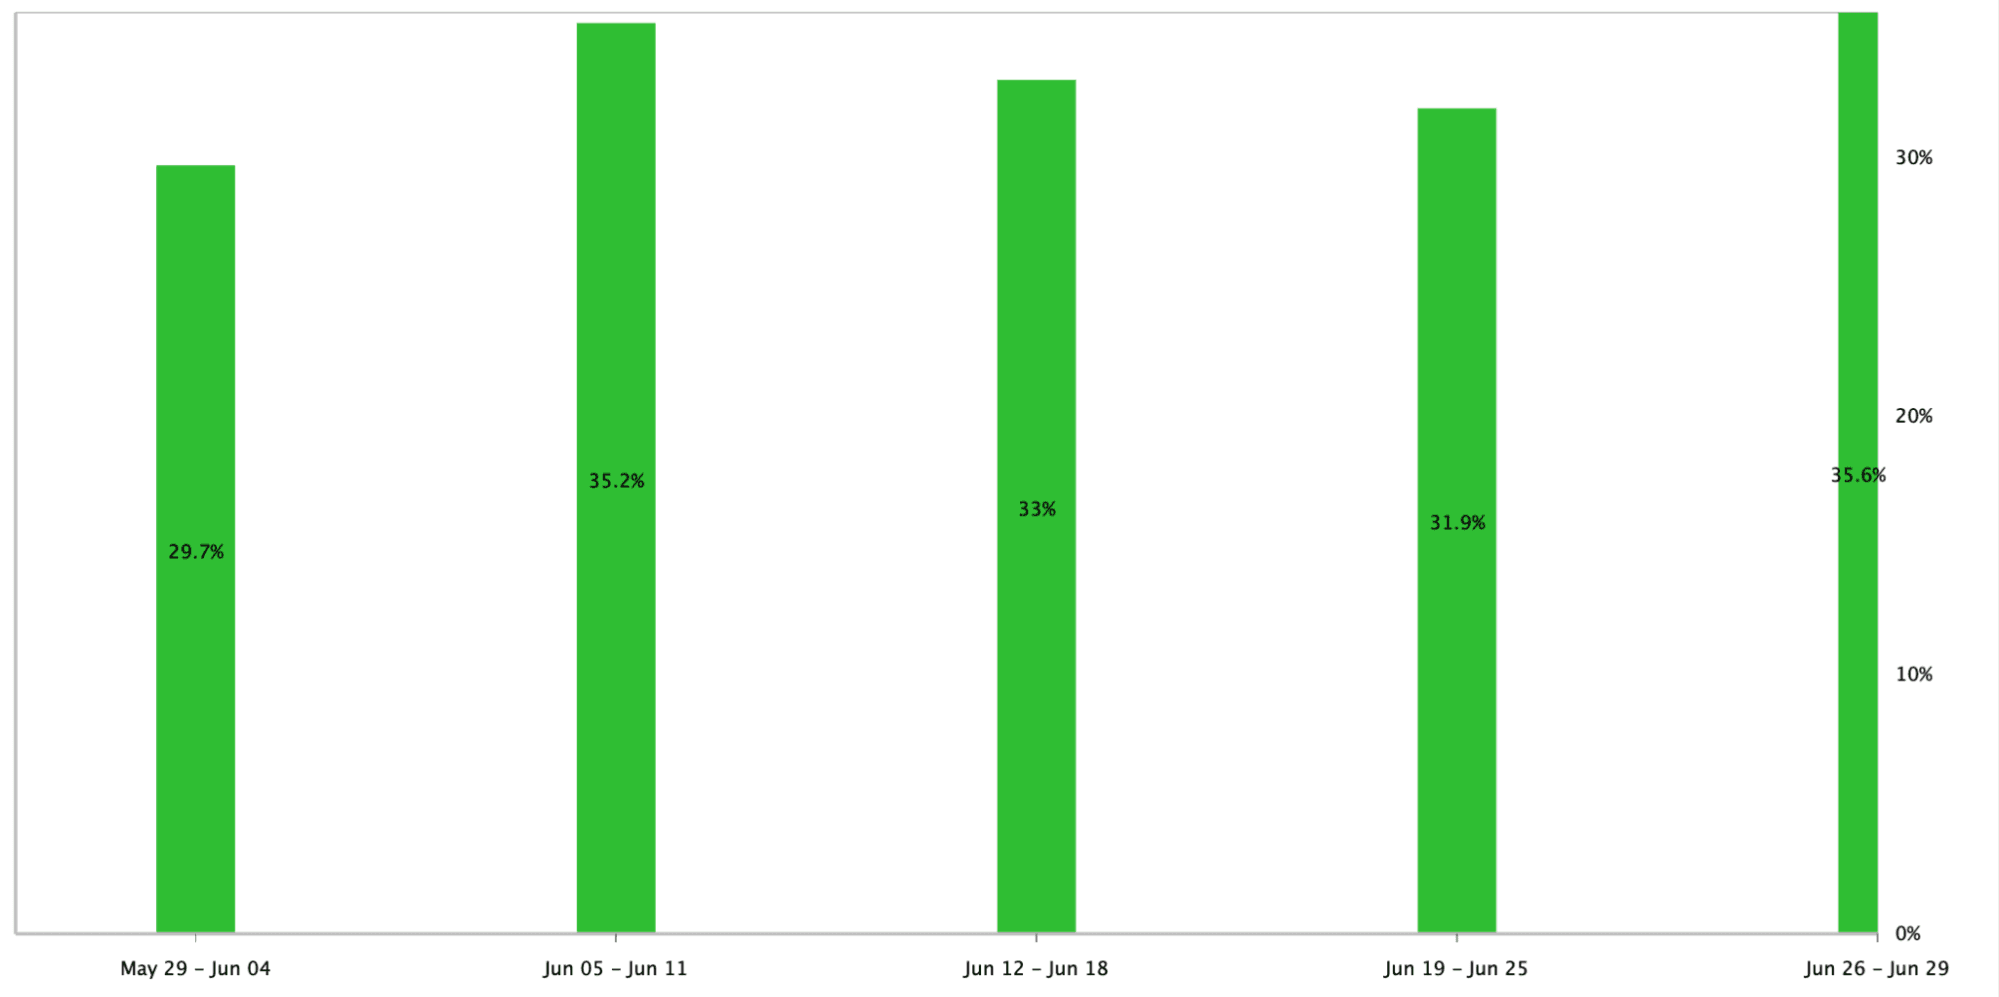 Bar graph showing ranking distribution for Fairfax location.